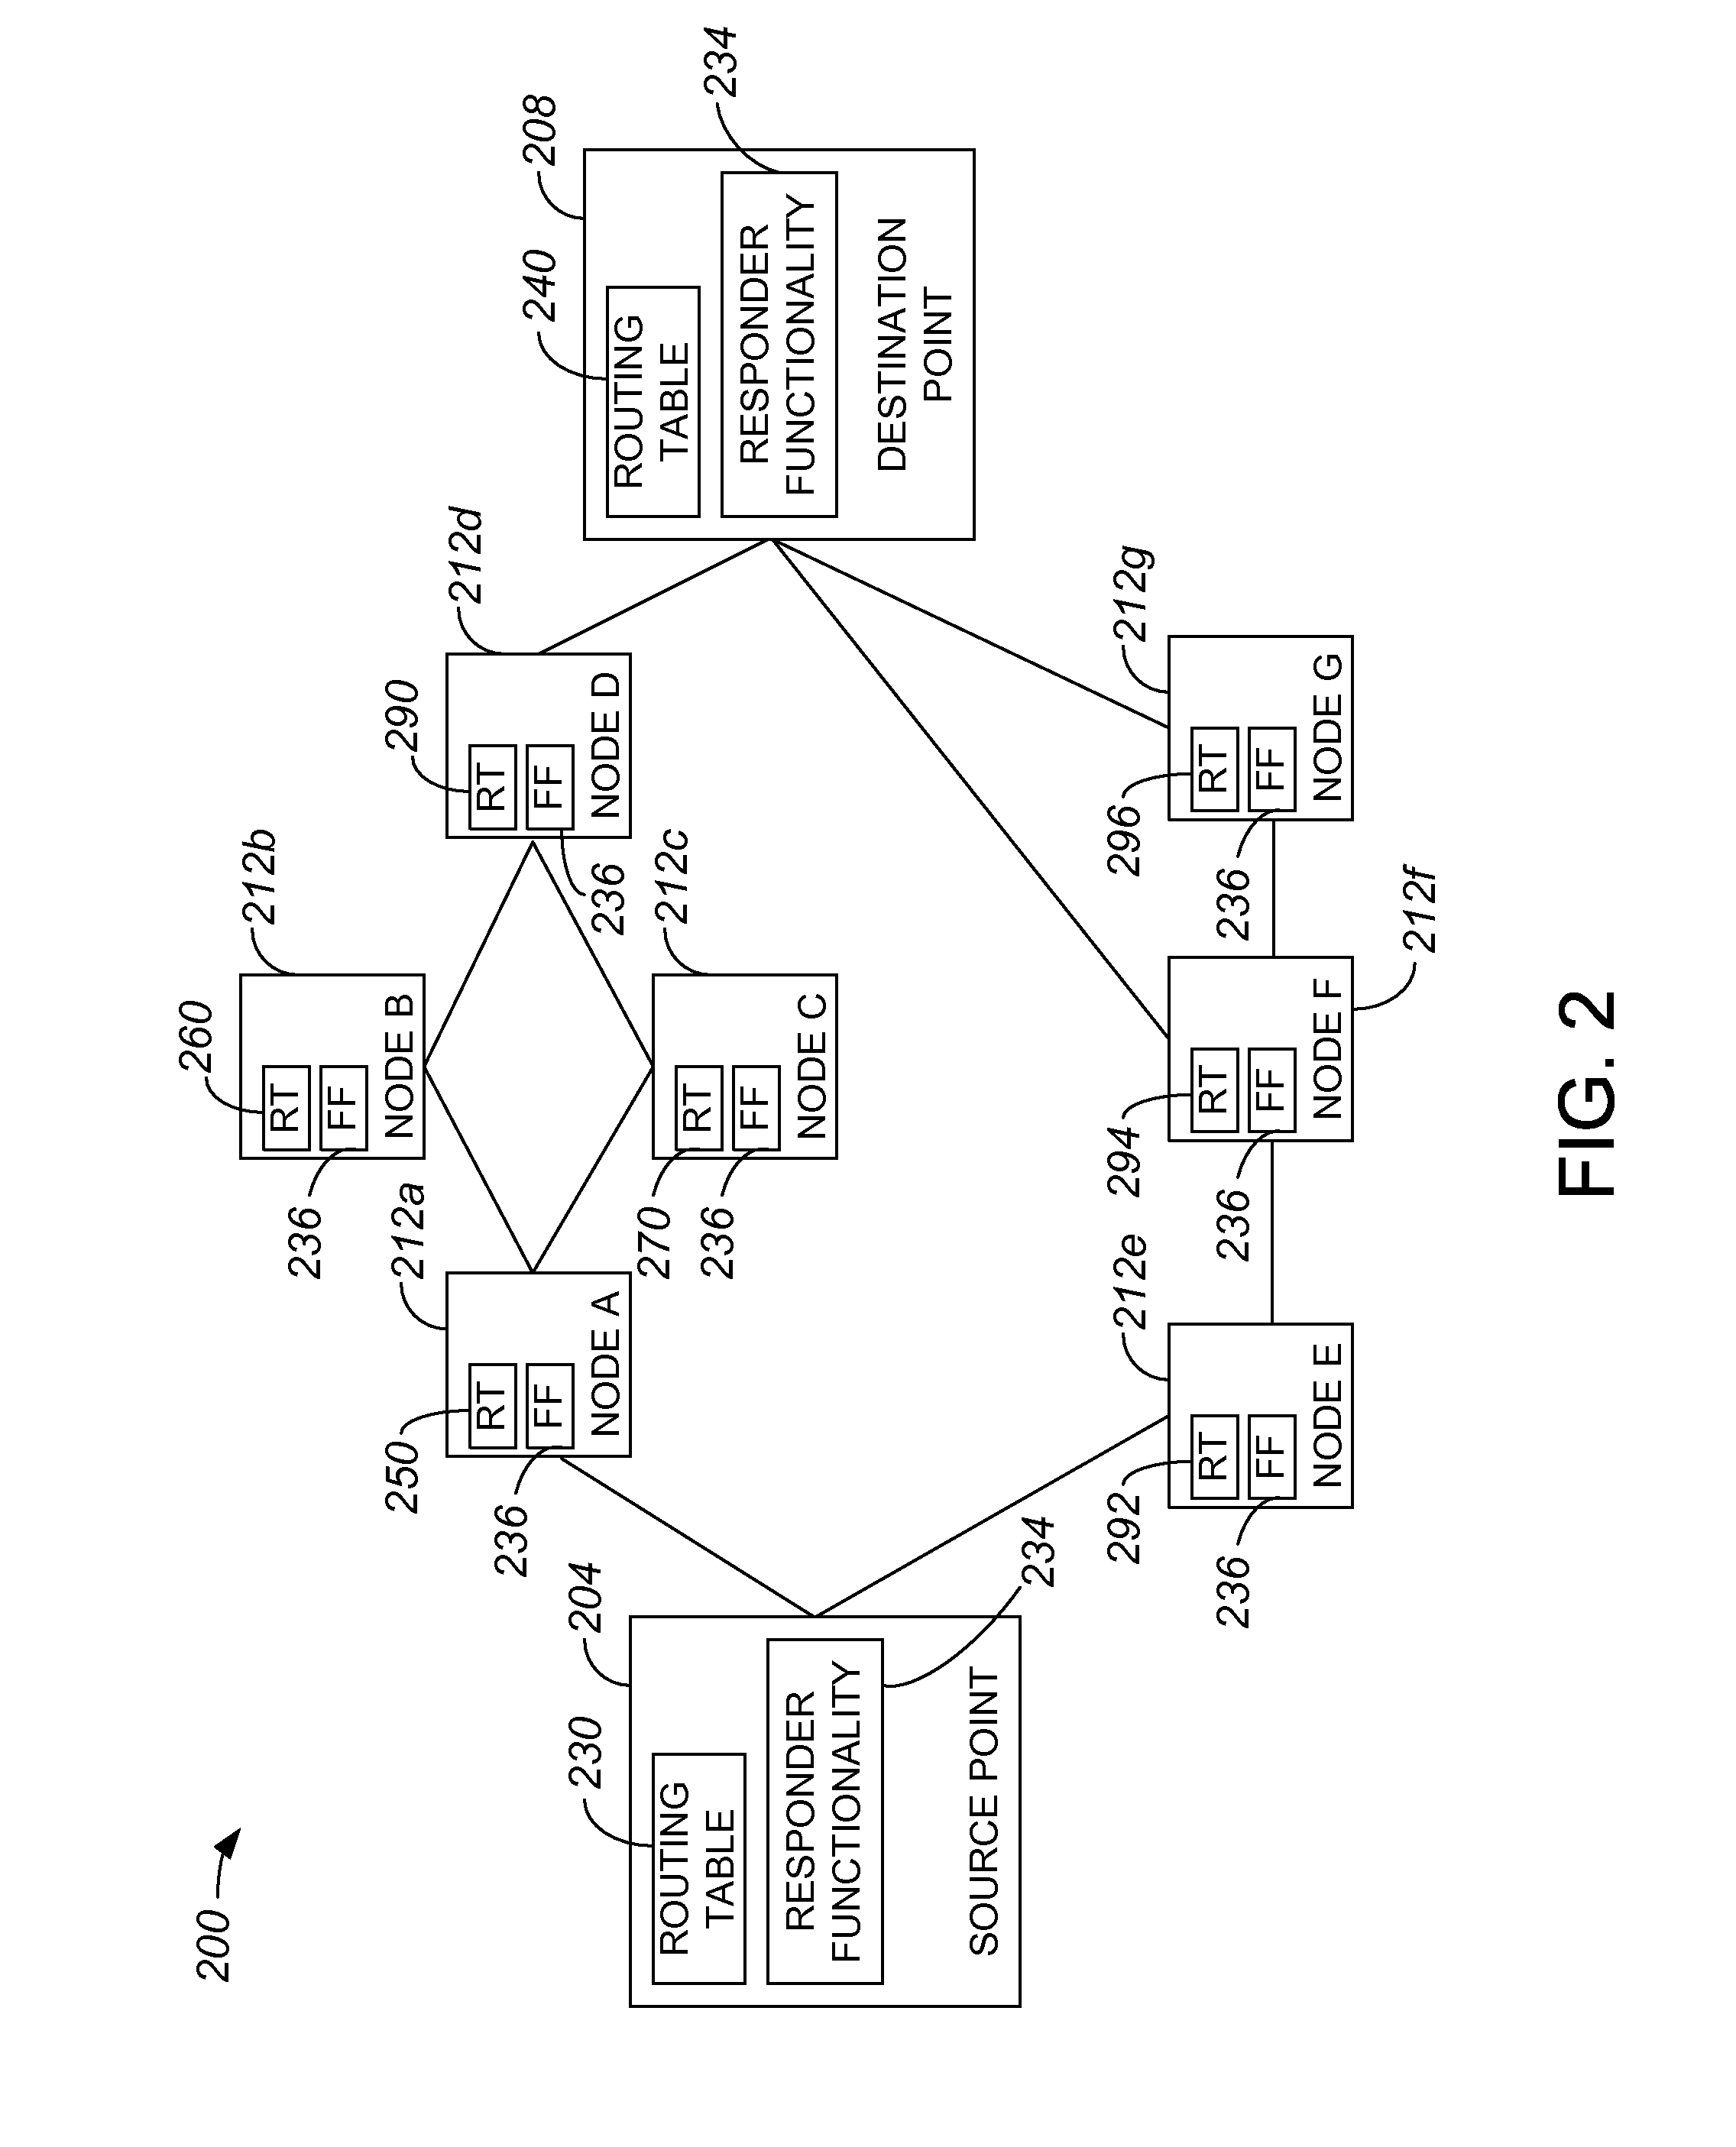 Source routing approach for network performance and availability measurement of specific paths